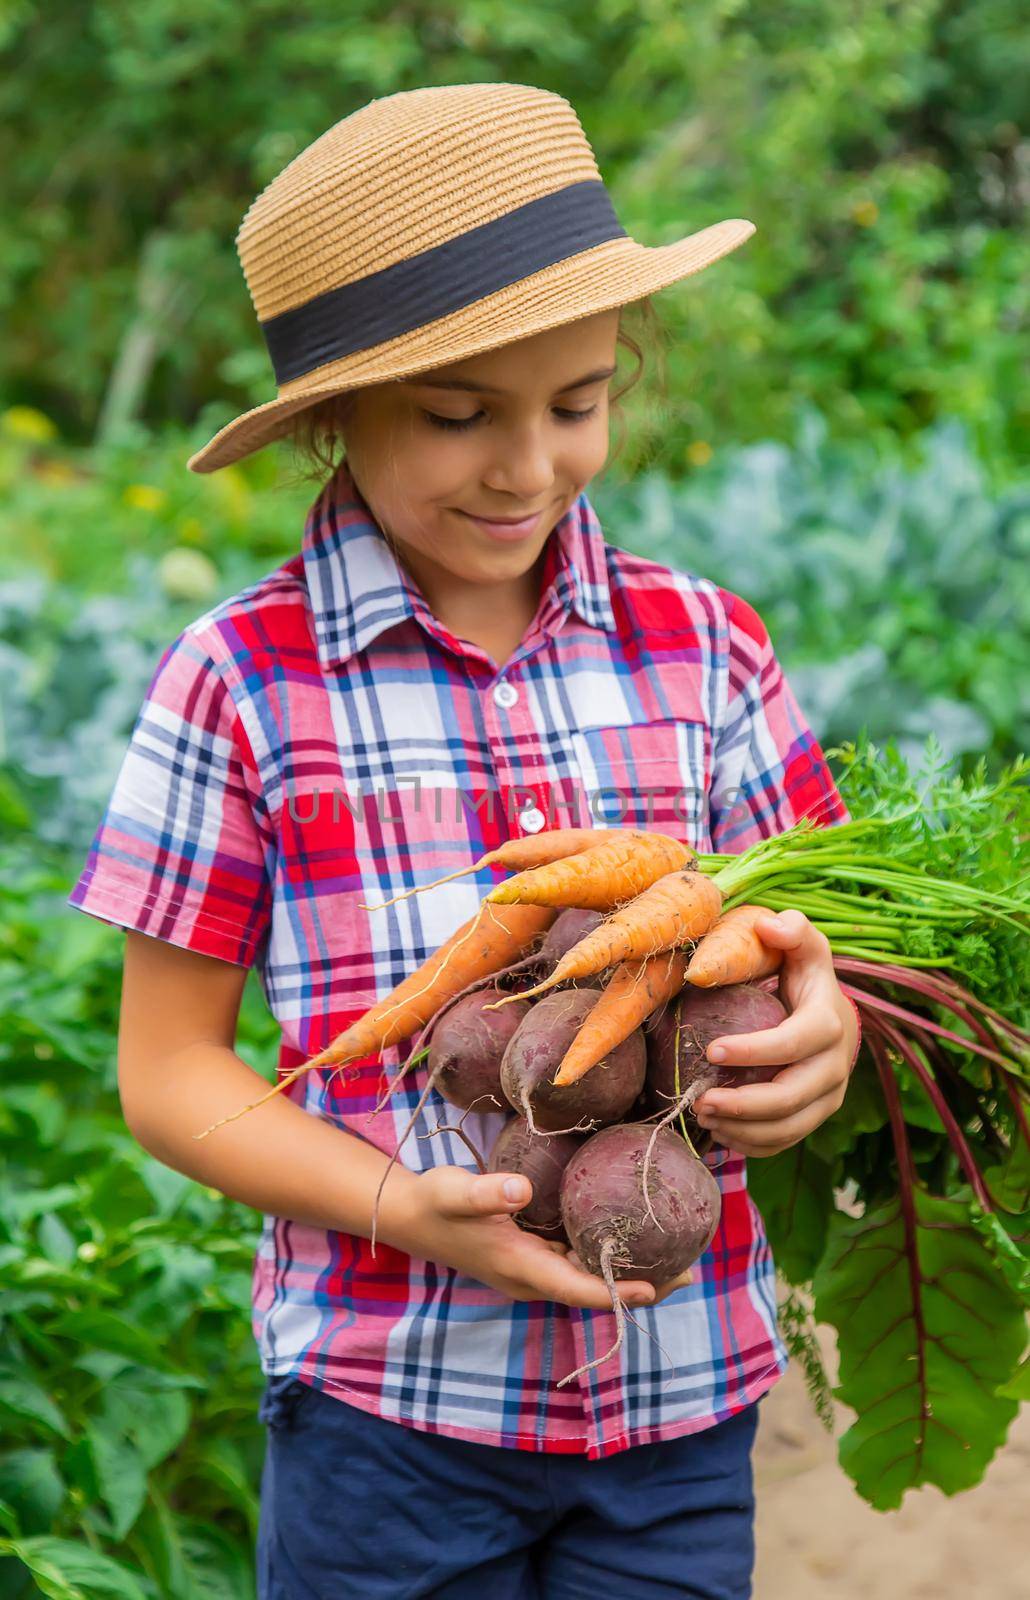 The child holds beets and carrots in his hands in the garden. Selective focus. by yanadjana